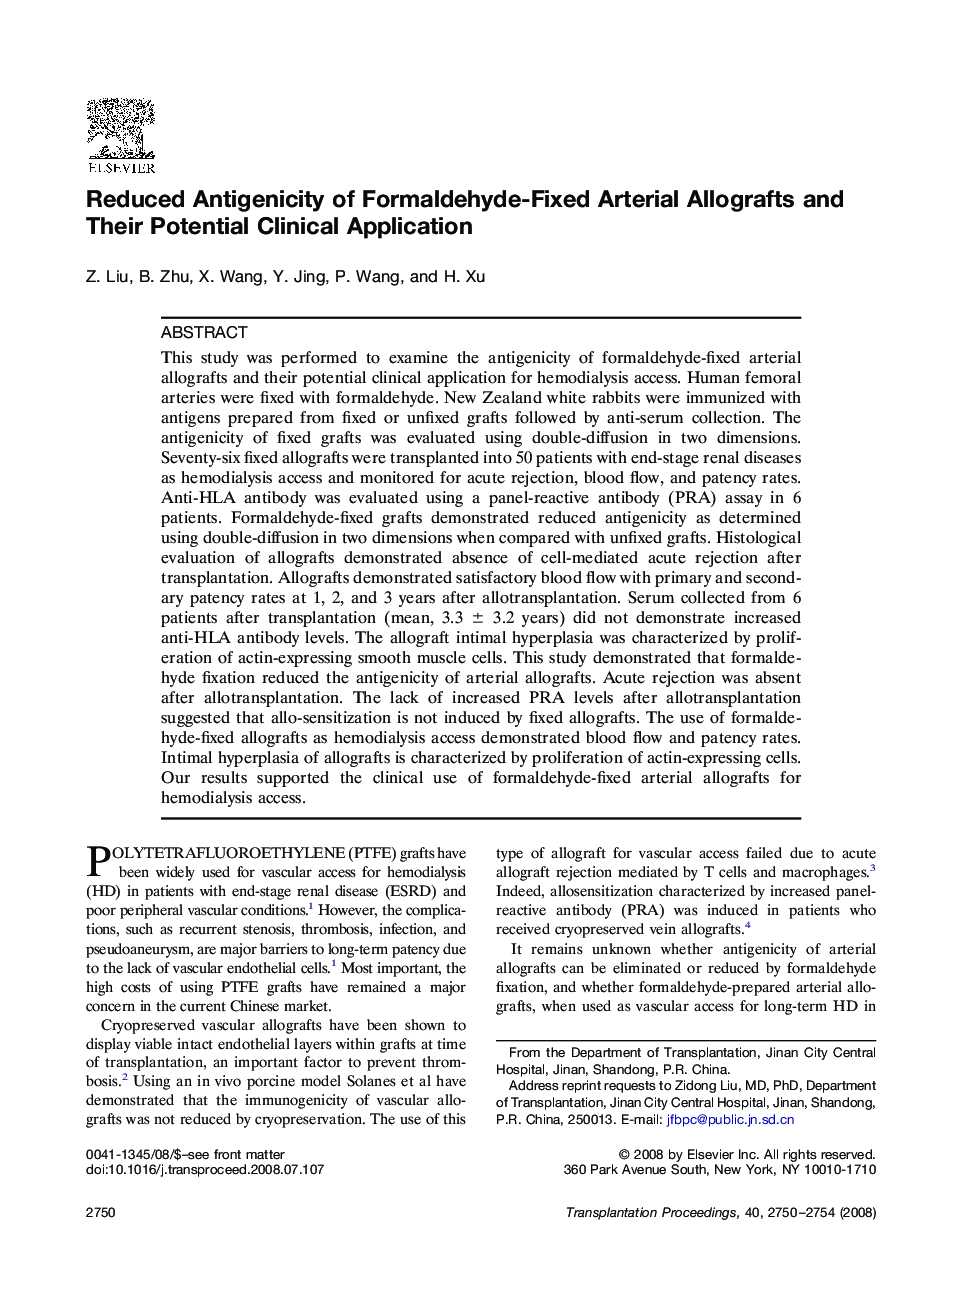 Reduced Antigenicity of Formaldehyde-Fixed Arterial Allografts and Their Potential Clinical Application